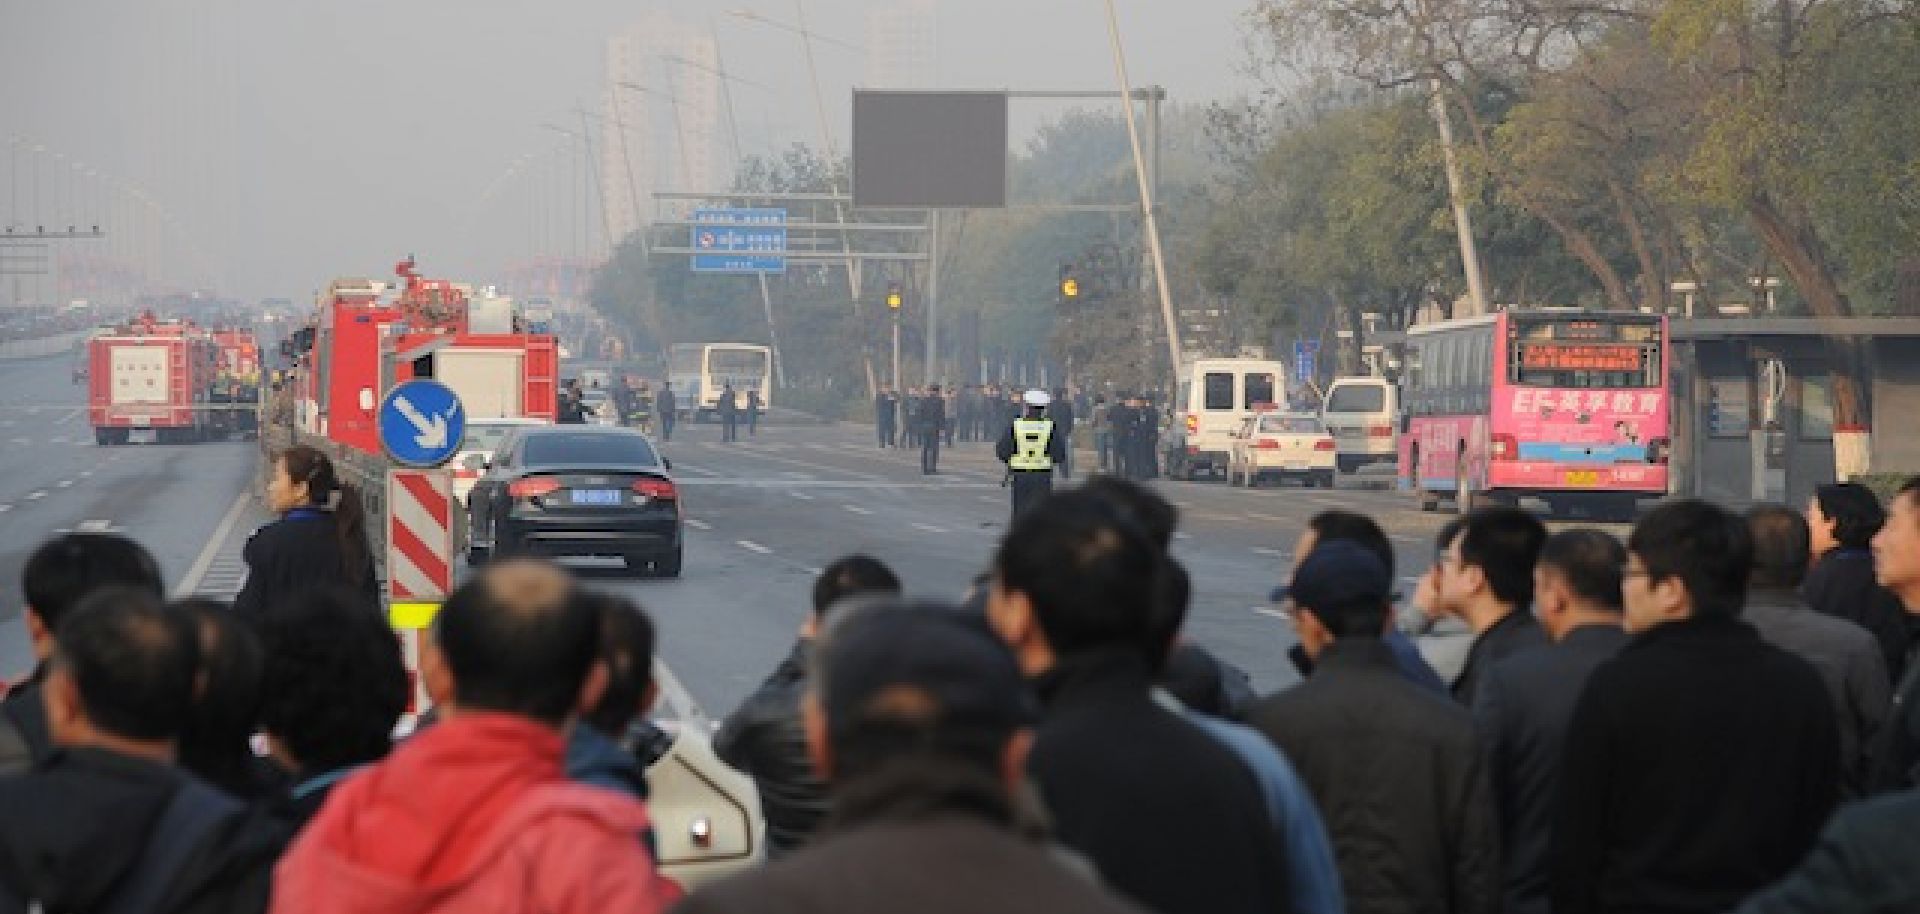 Shanxi Bombings: A Worrying Statement About China's Ethnic Tensions